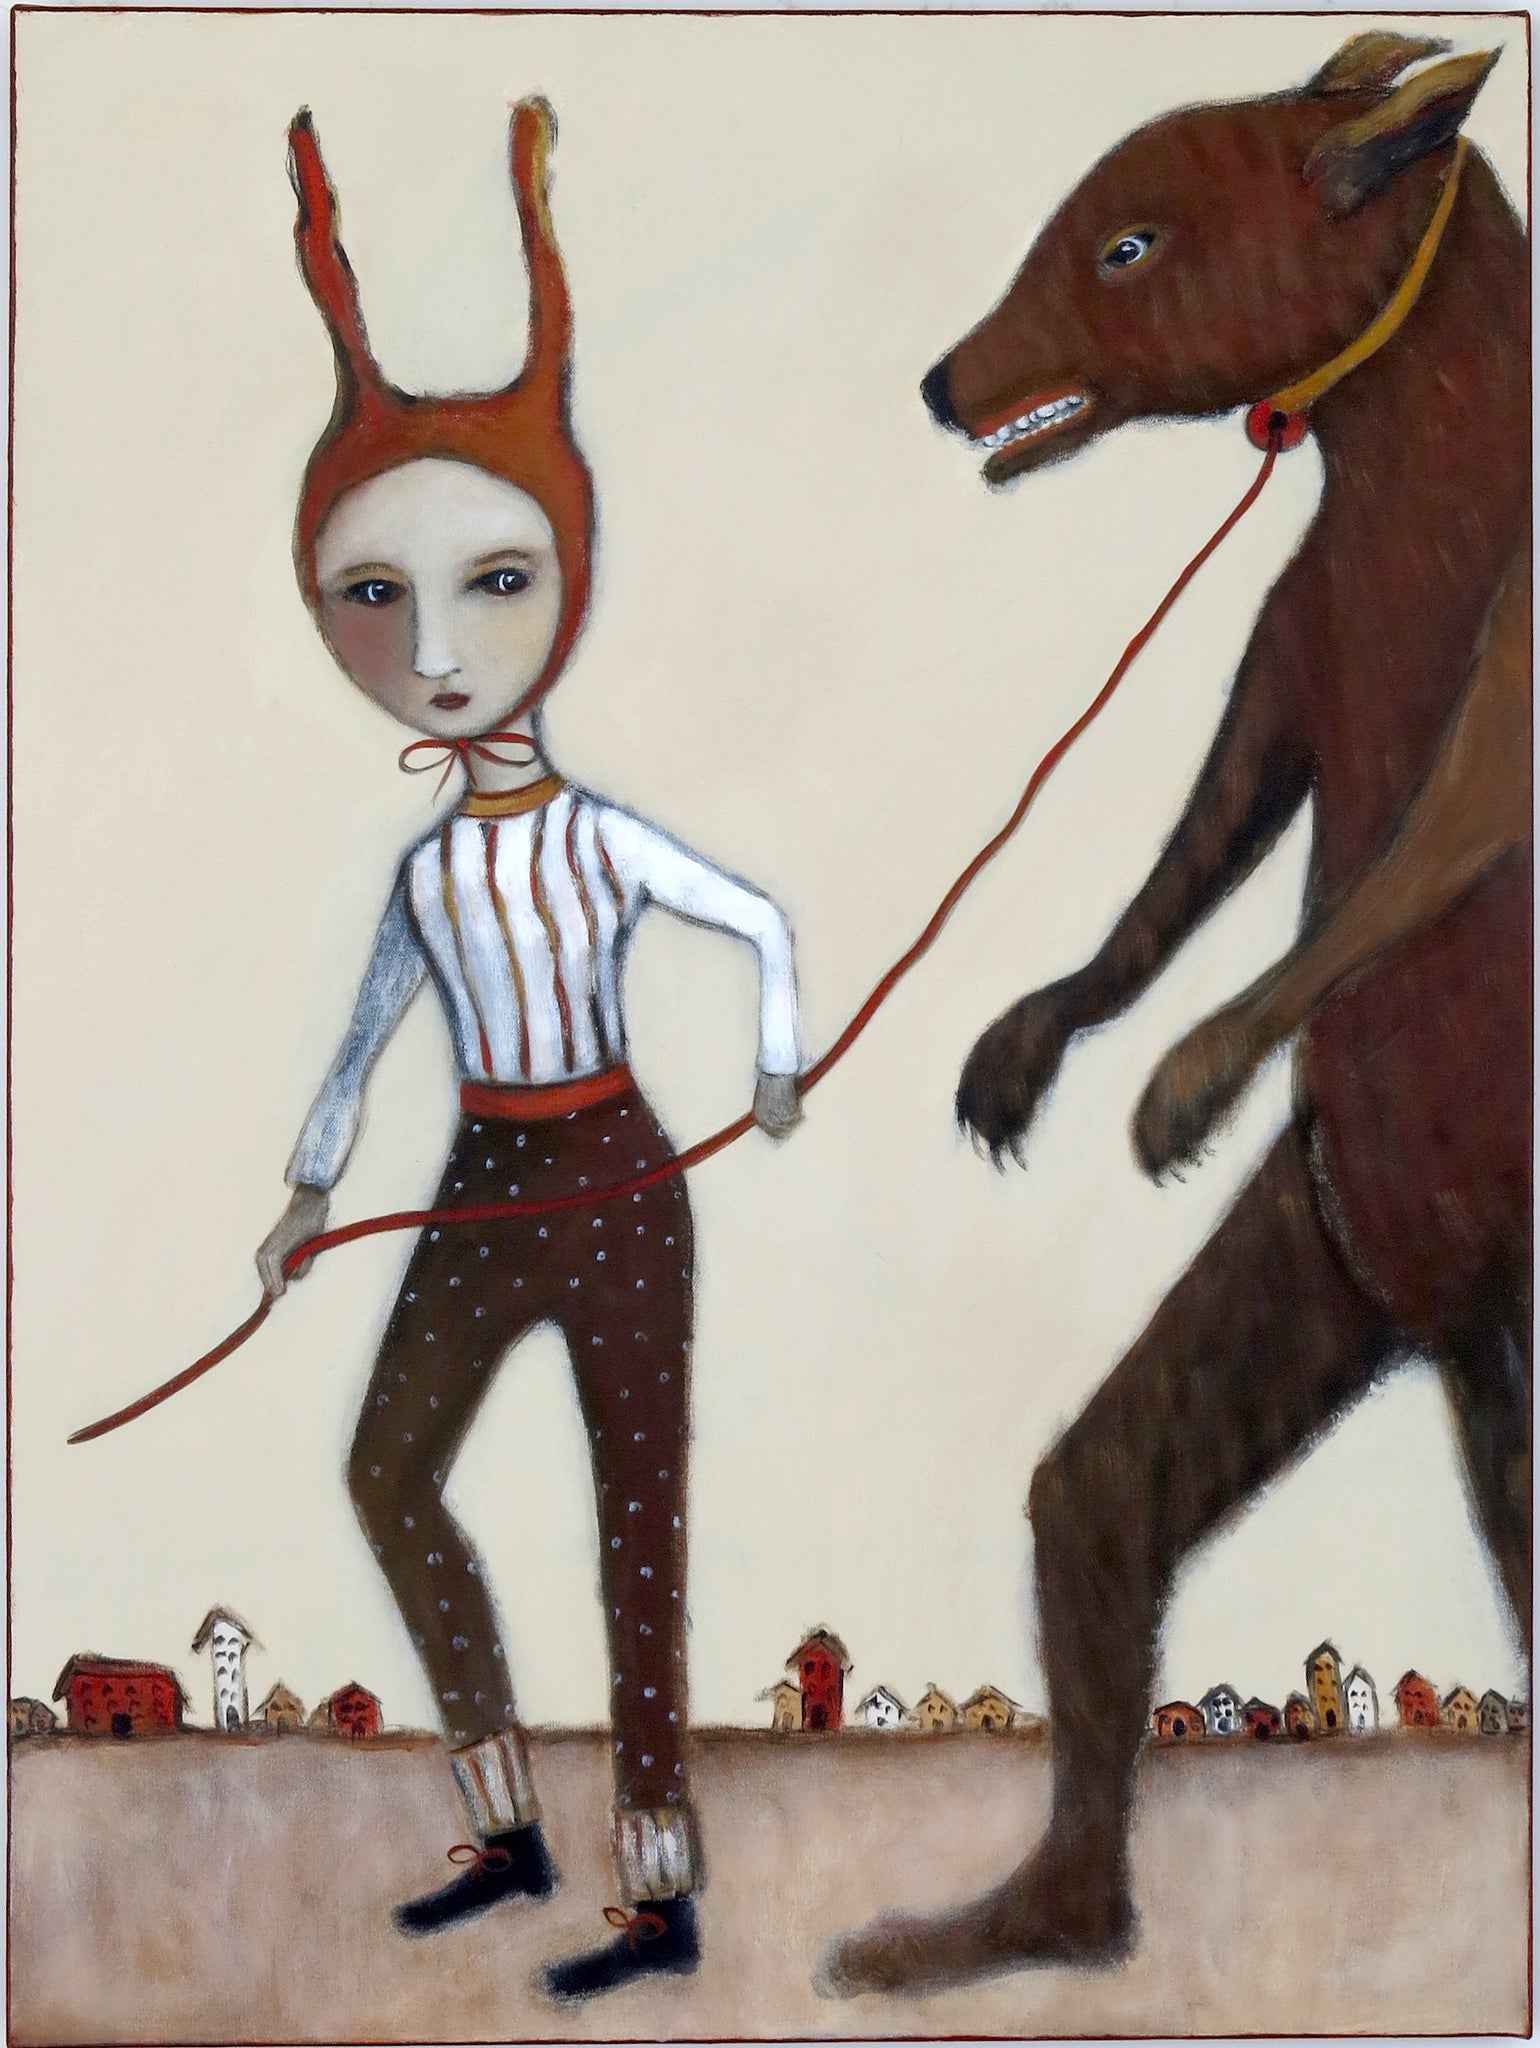 Sold   "Keeping A Close Eye And A Short Leash On Her Fears"